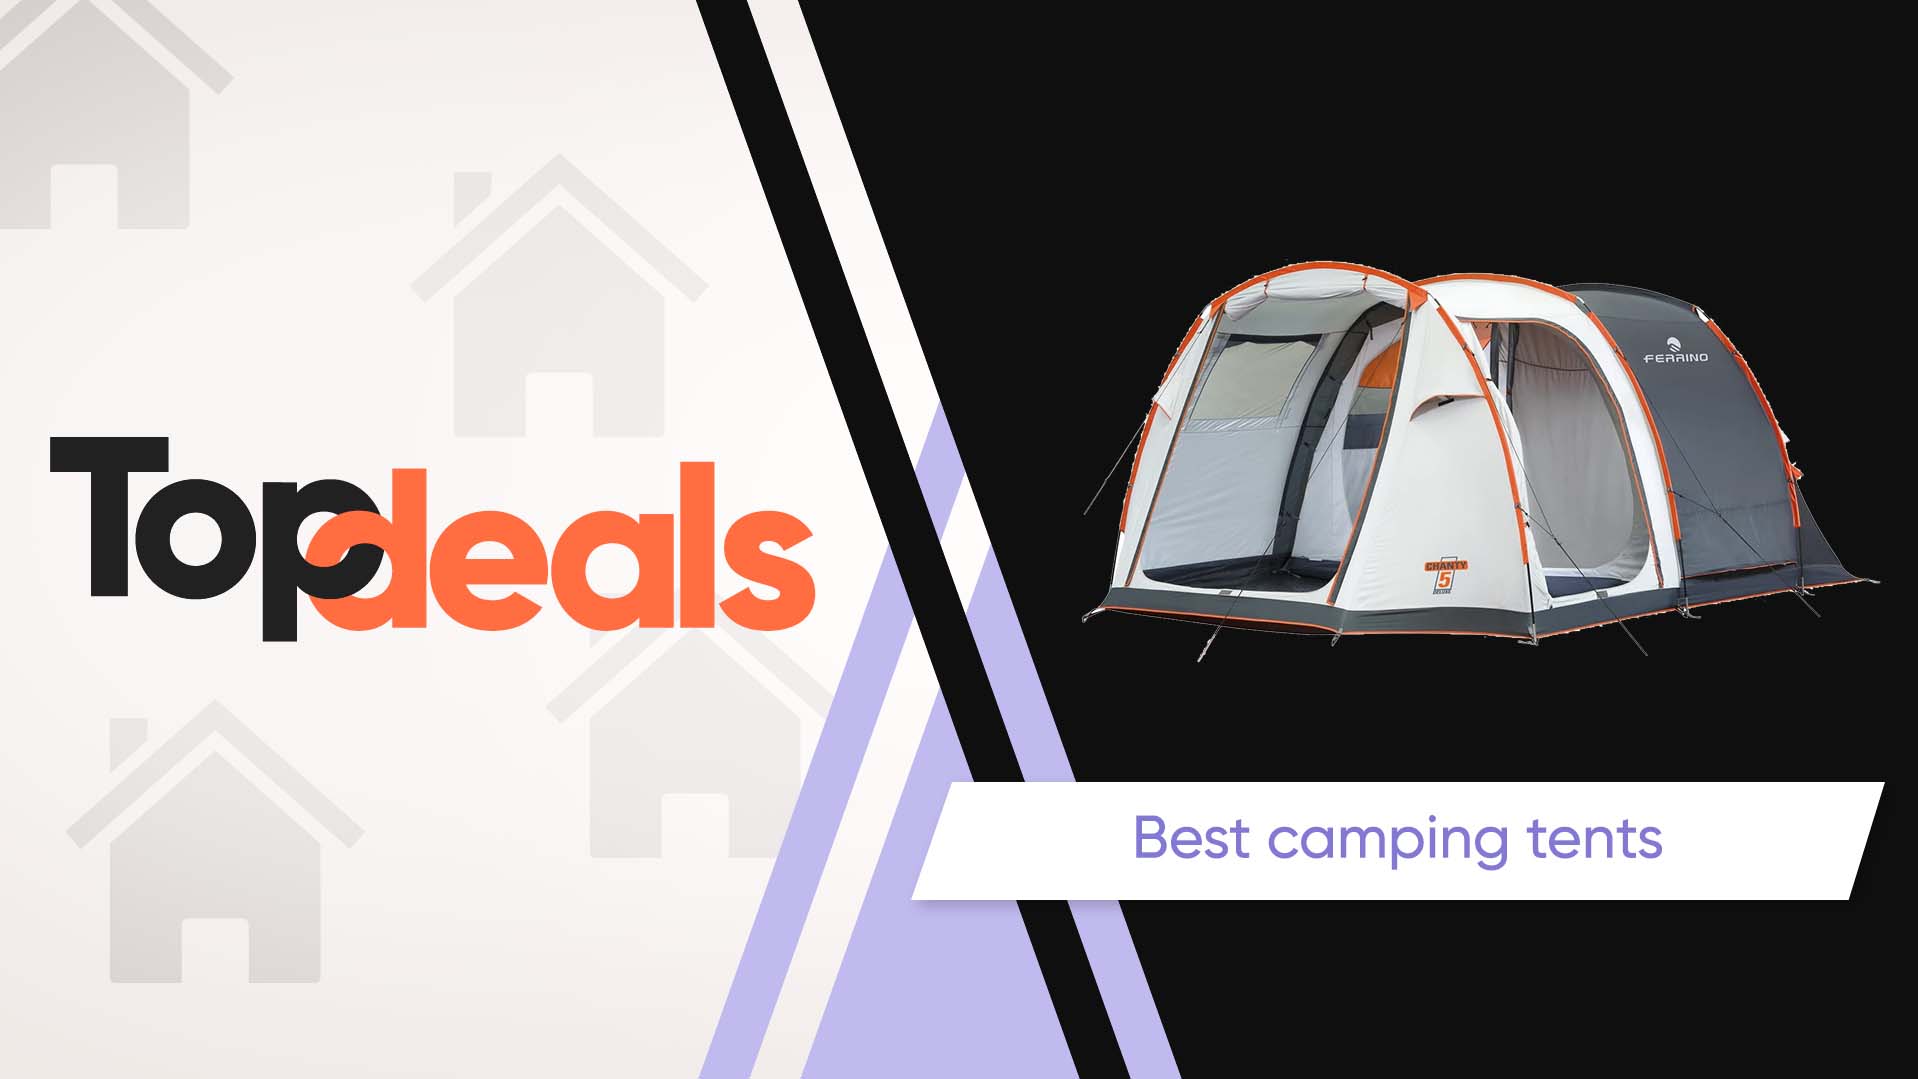 Best camping tents